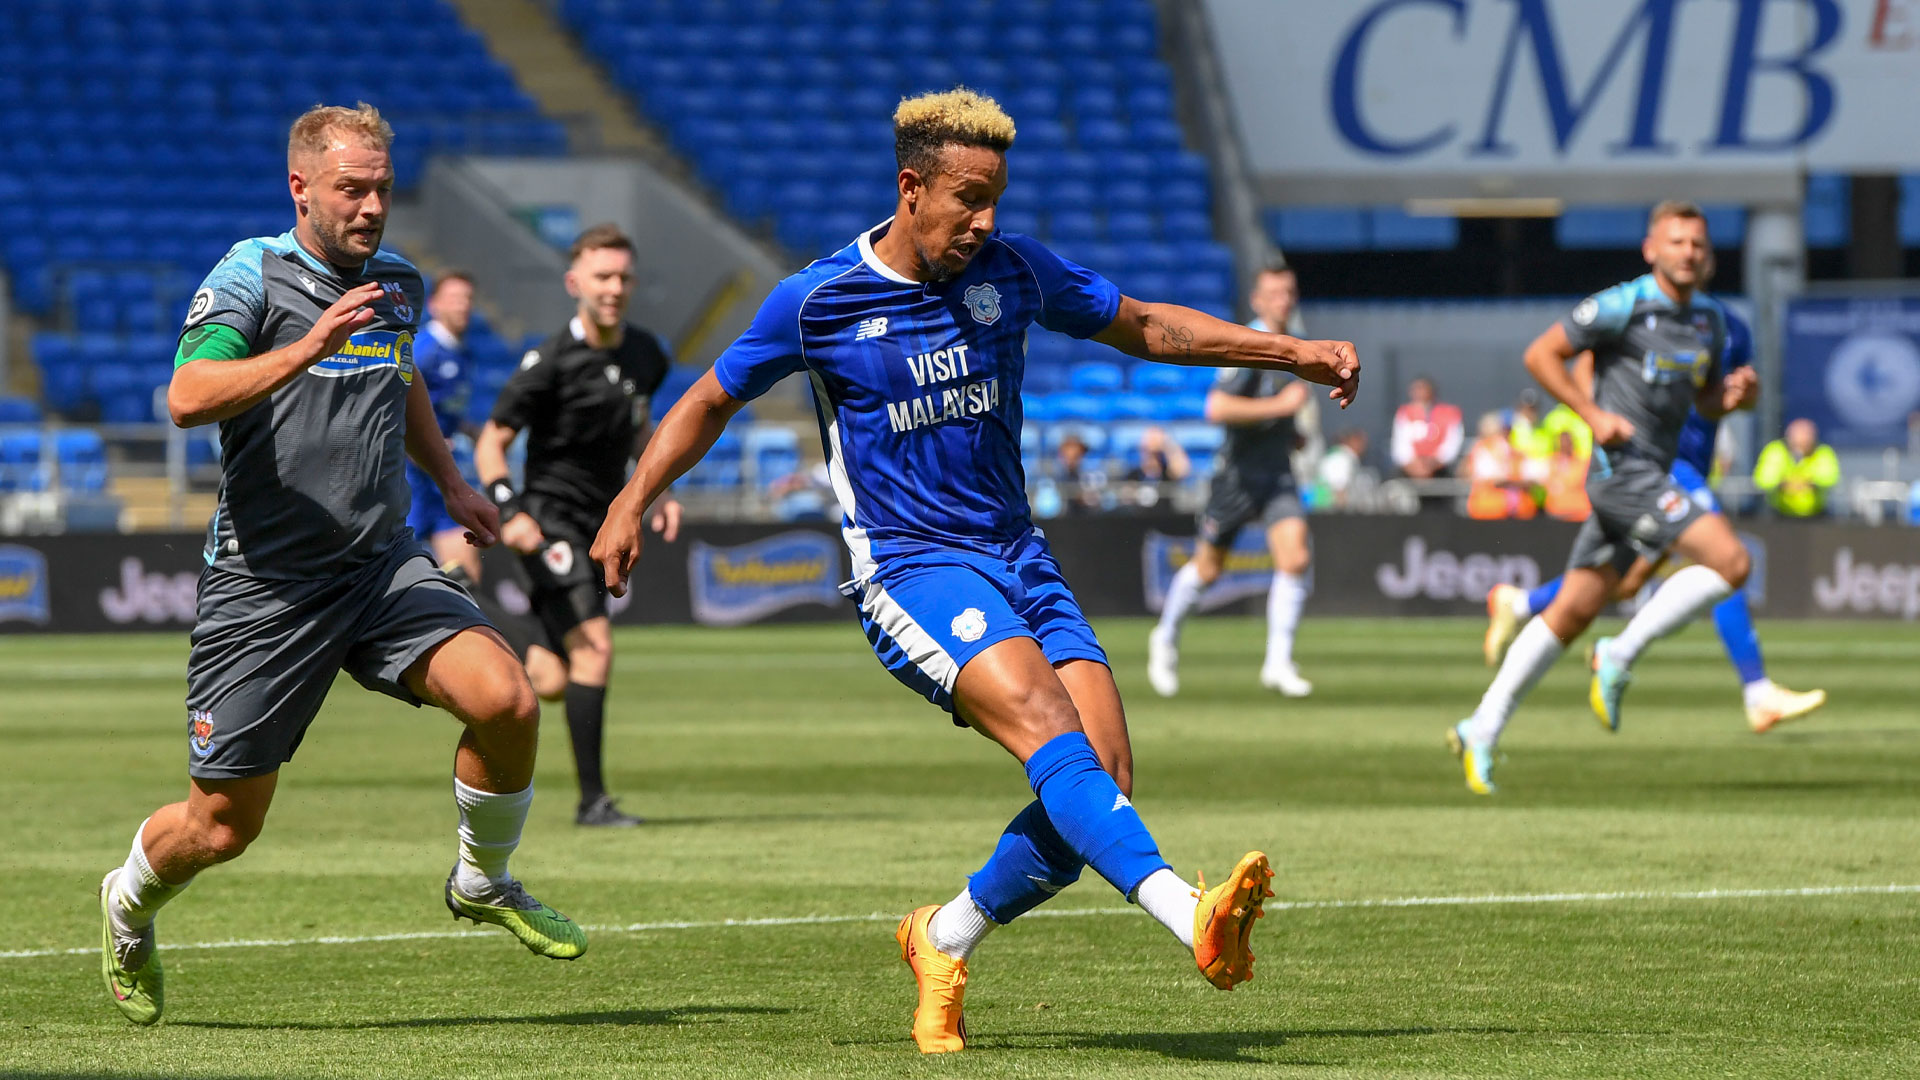 Callum Robinson in action for Cardiff City